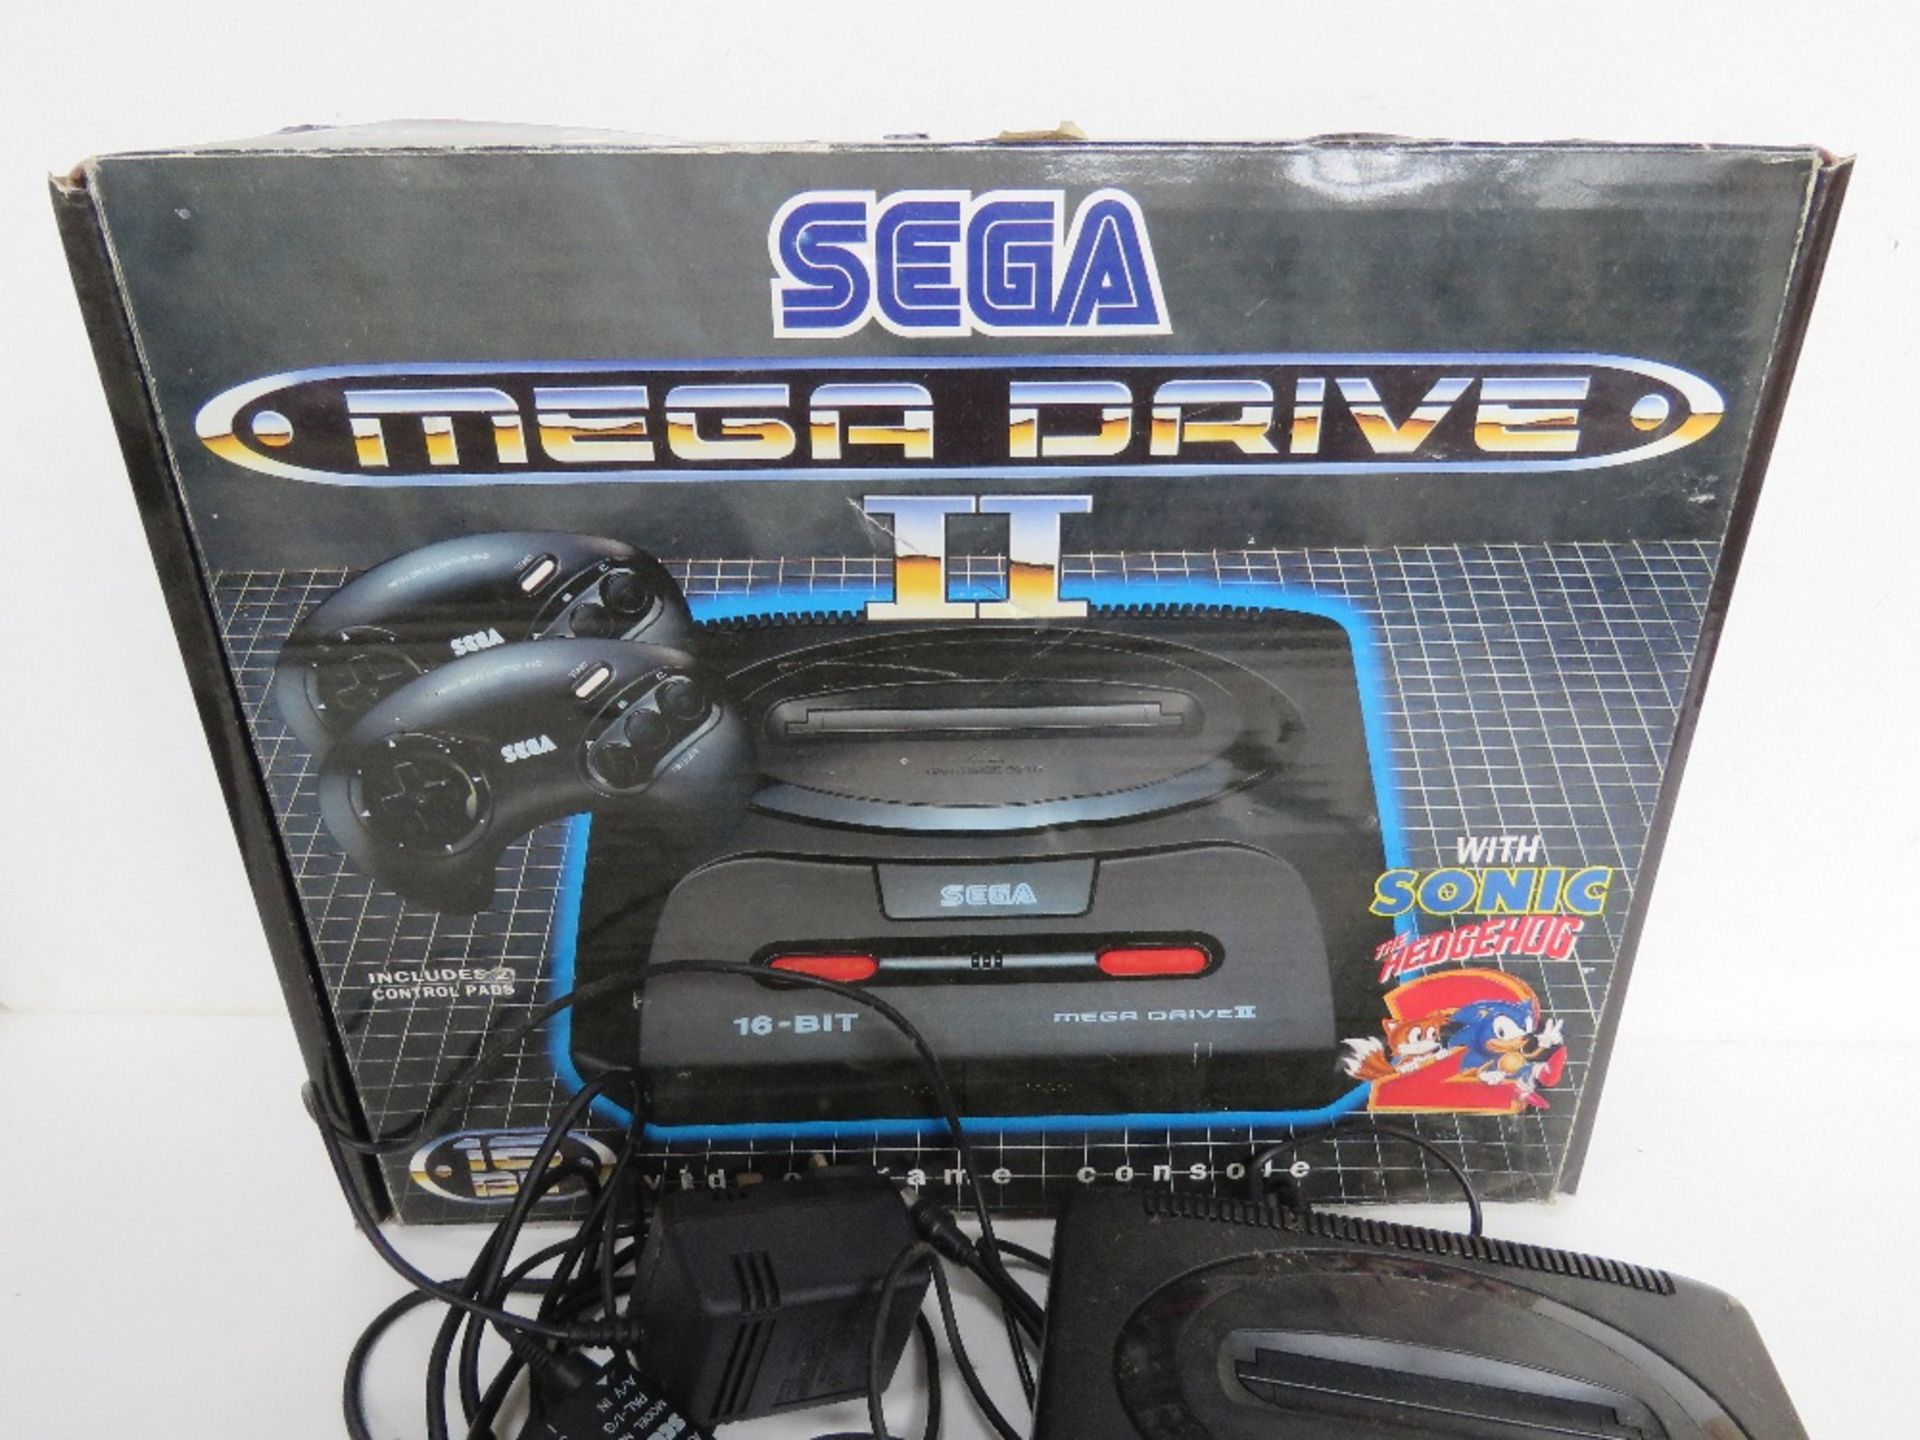 A Sega Mega Drive II console with controllers and cable in original box. - Image 3 of 4